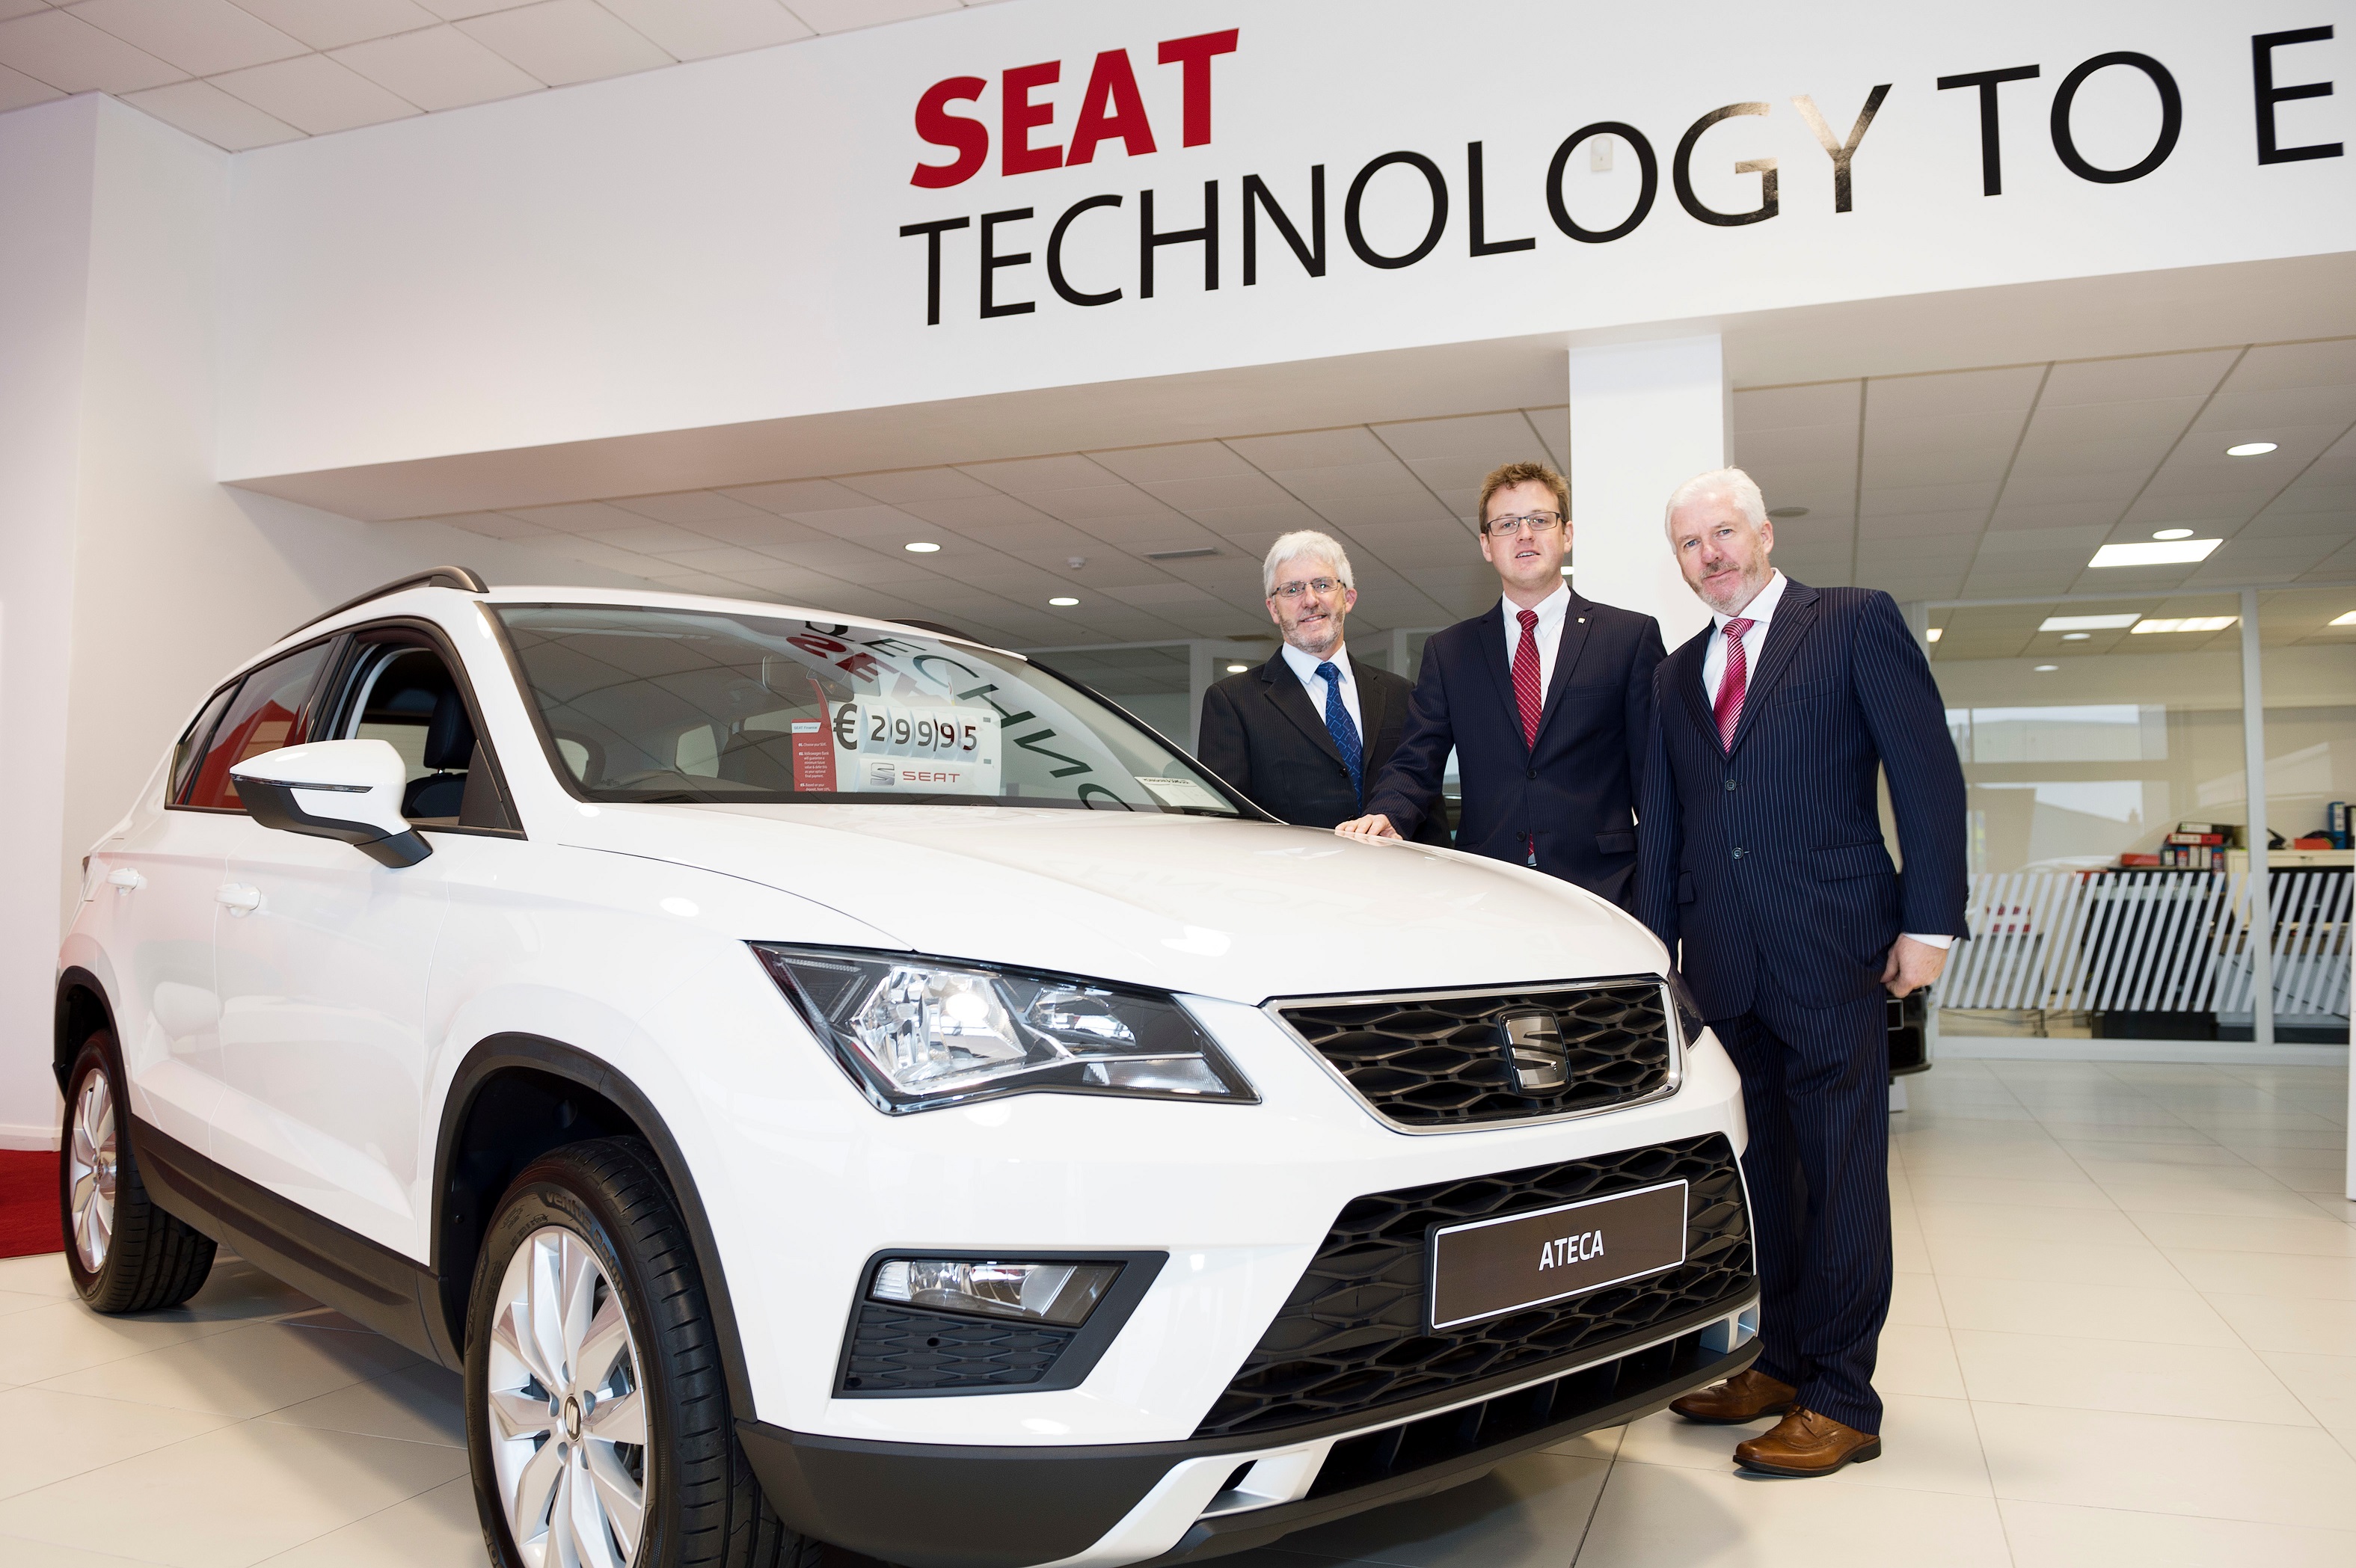 New SEAT Dealership For Galway | Rev.ie